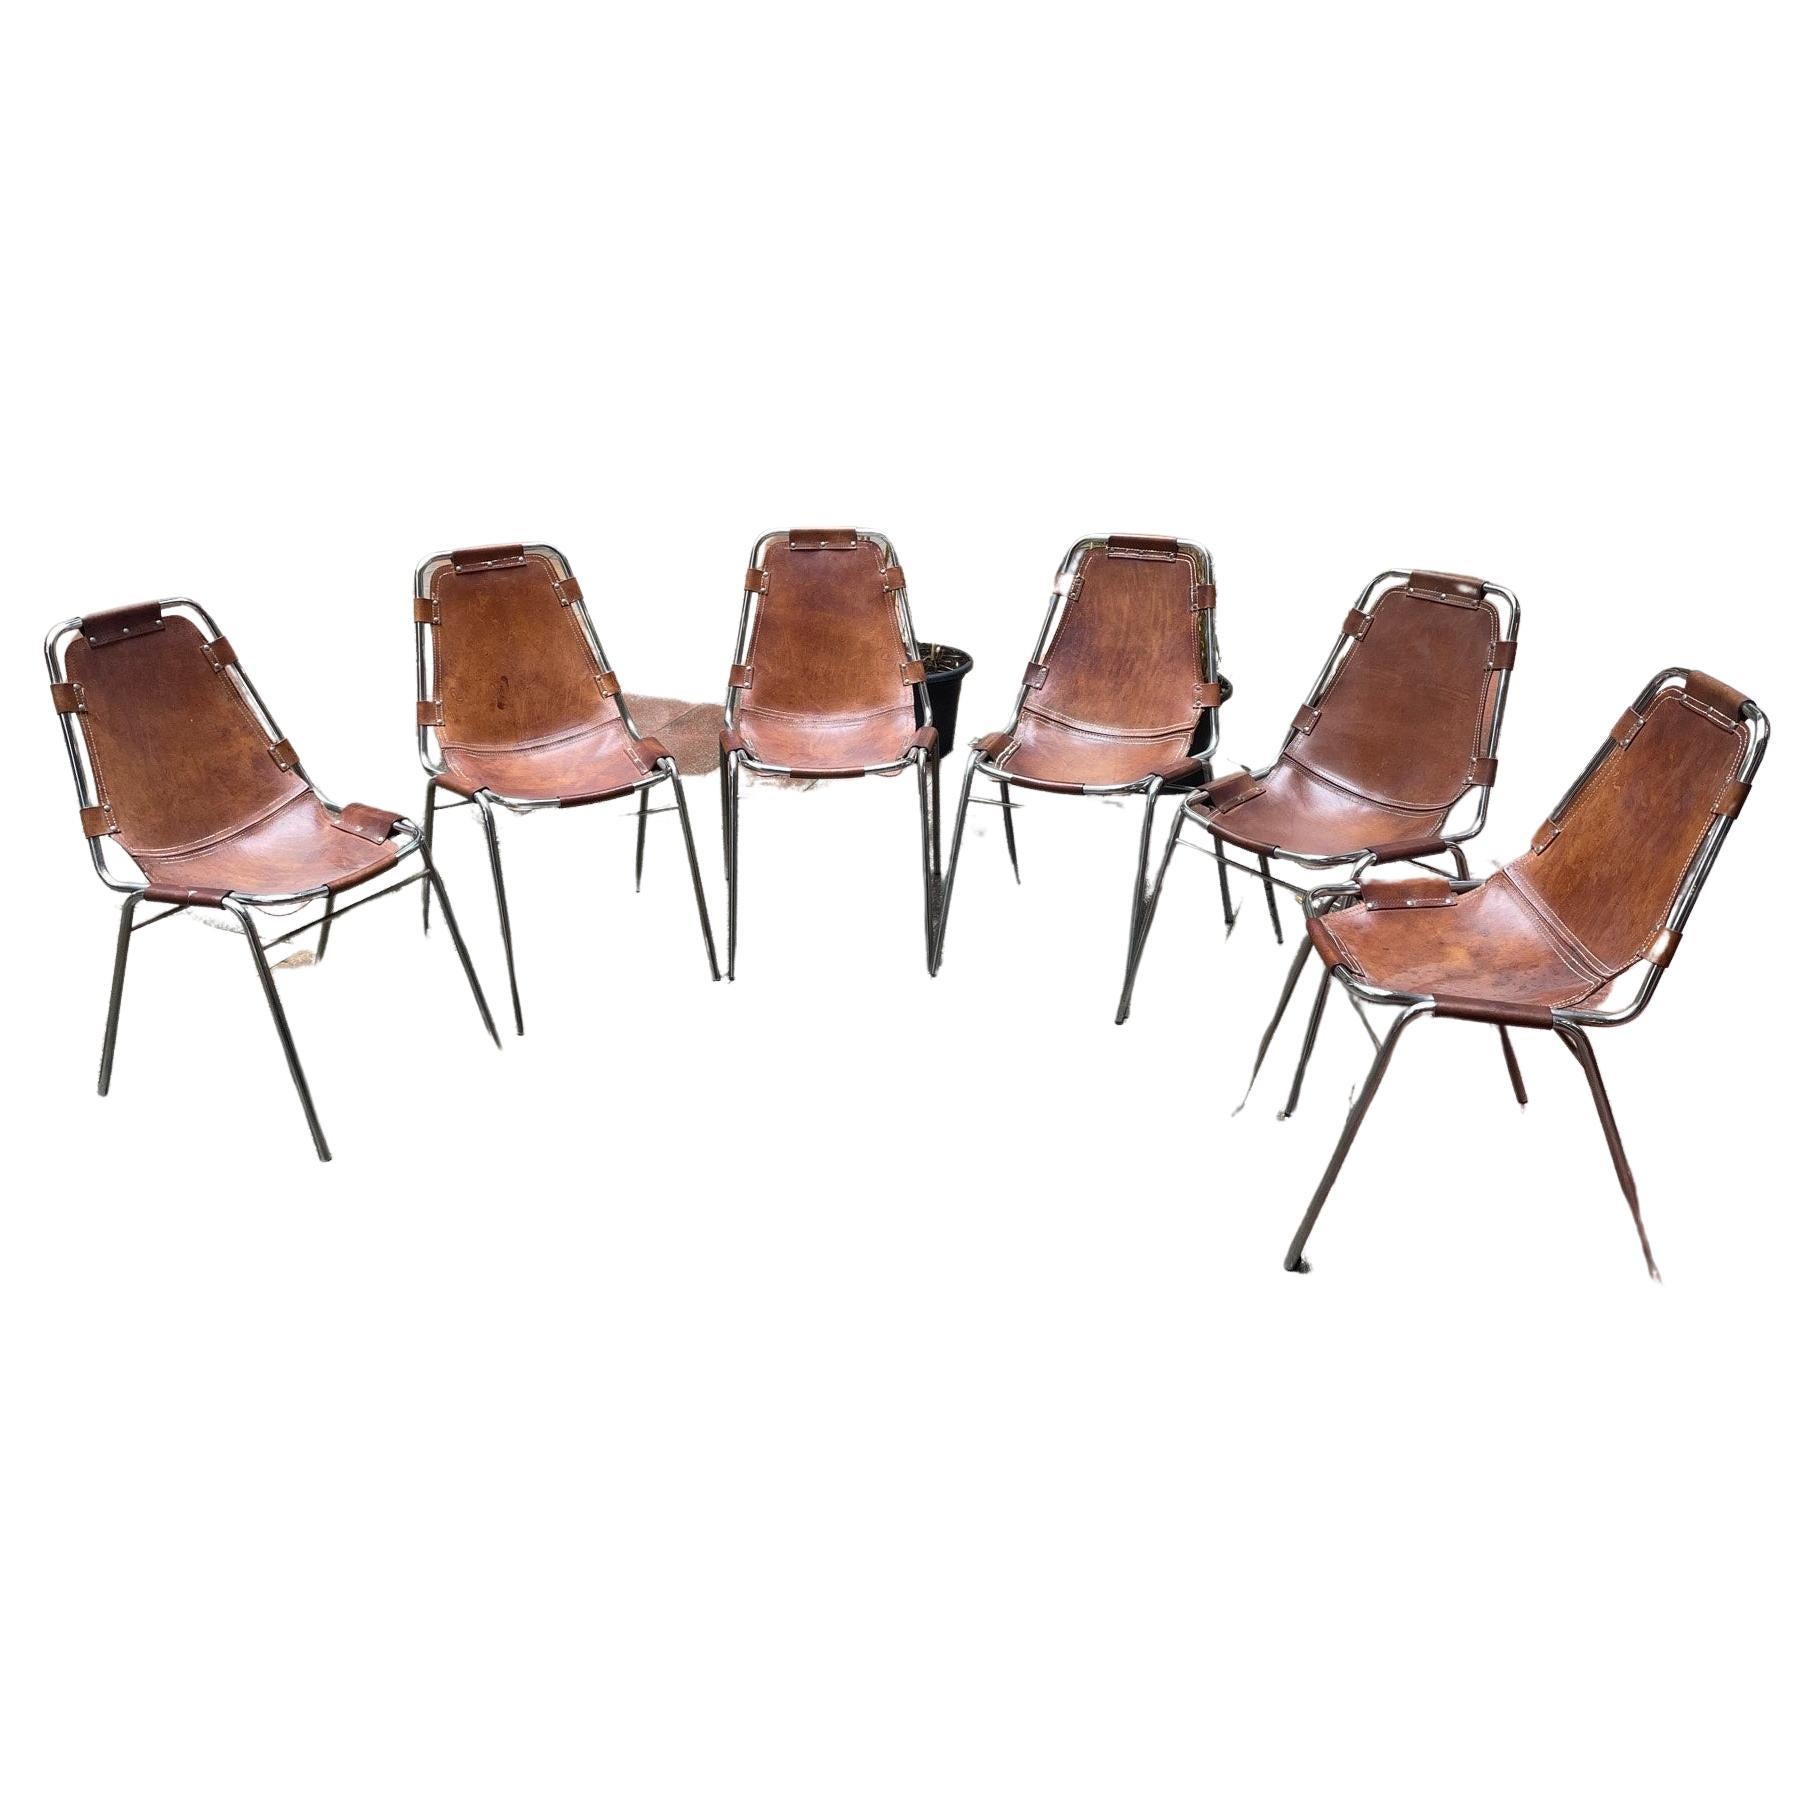 Charlotte Perriand, Set of 6 Chairs Les Arcs, circa 1960 For Sale